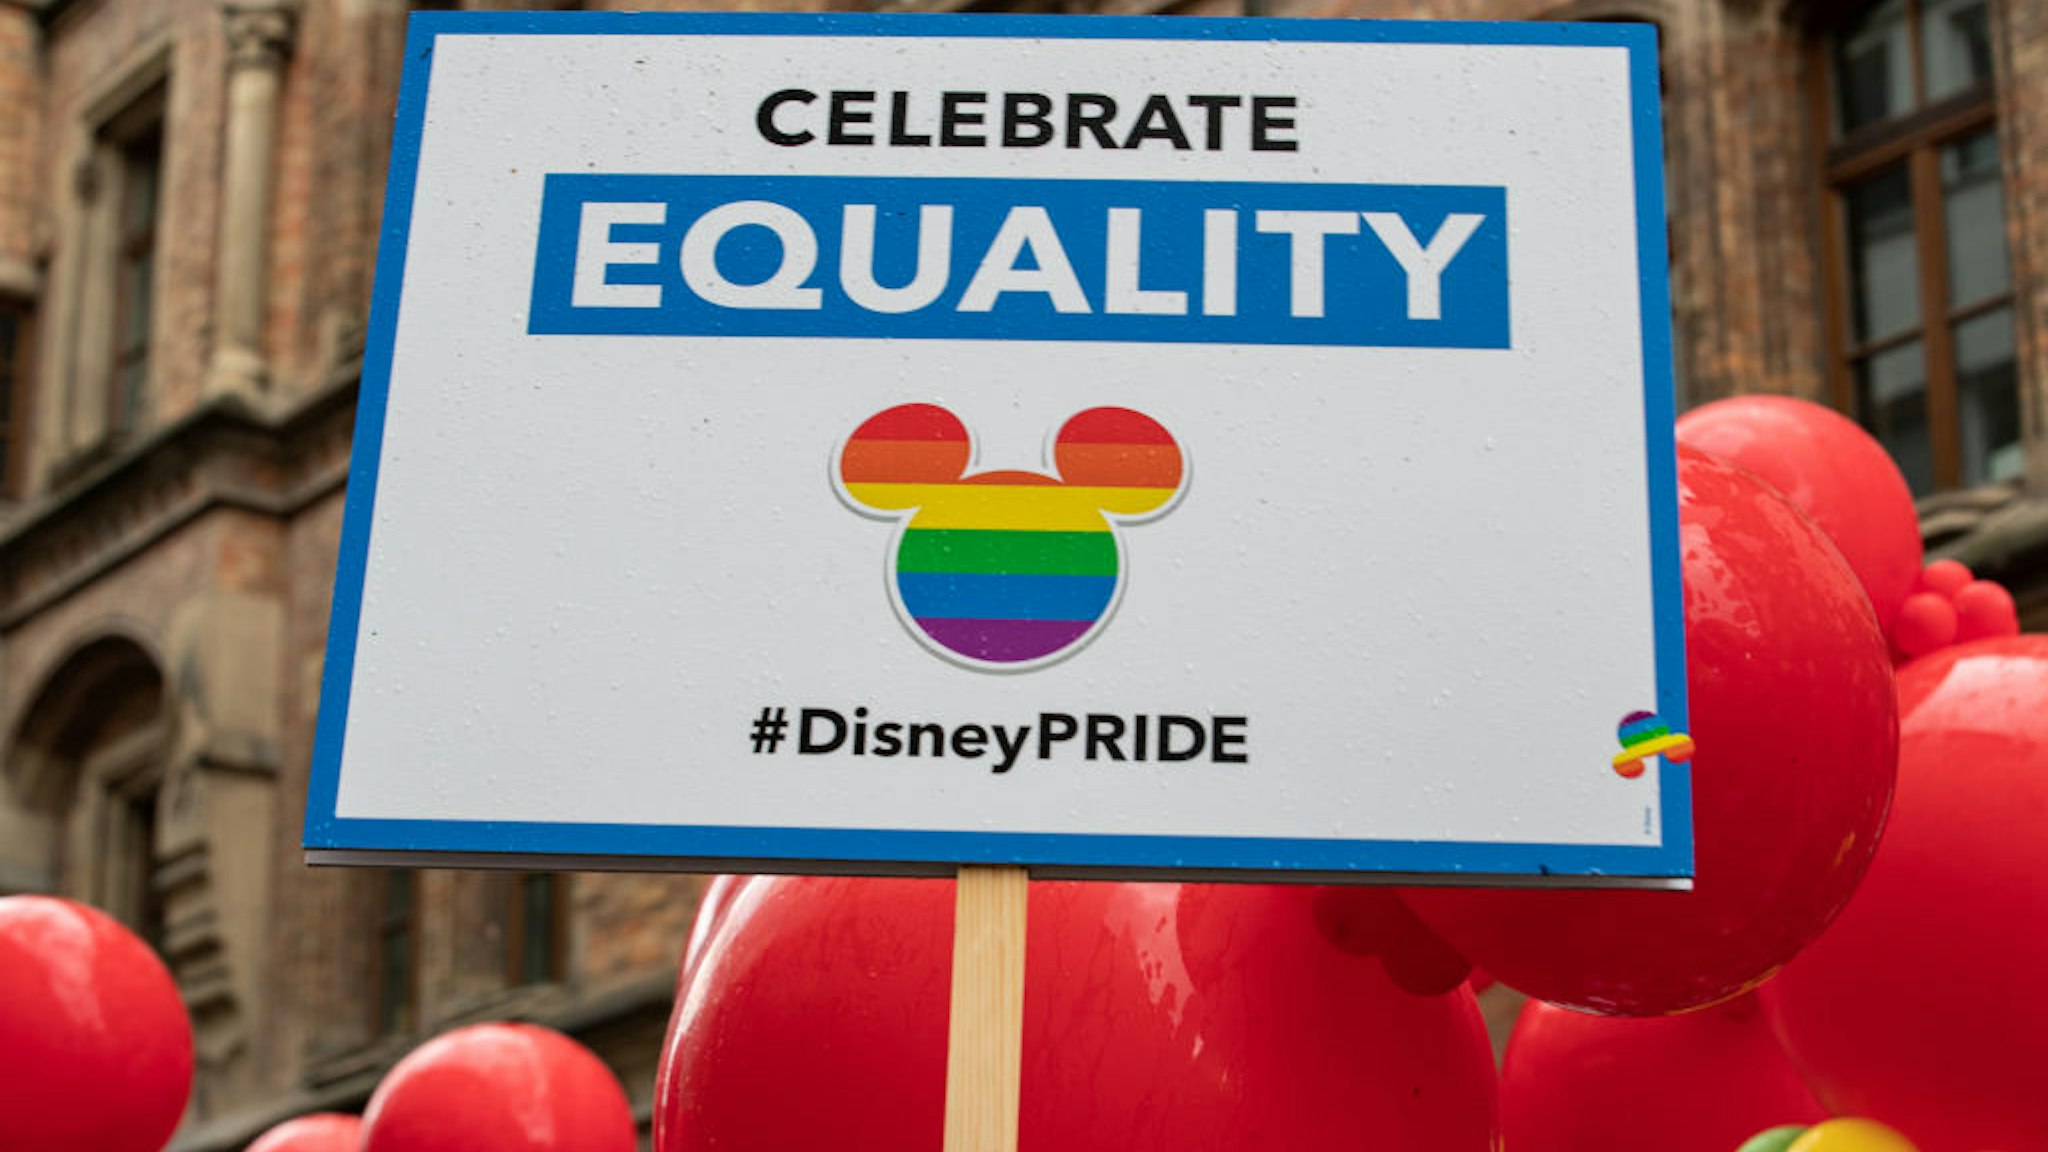 Disney celebrates equality. On 13.7.2019 Hundreds of Thousands celebrated the Pride ( Christopher Street Day ) in Munich. Several LGBTQ Groups participated. (Photo by Alexander Pohl/NurPhoto via Getty Images)